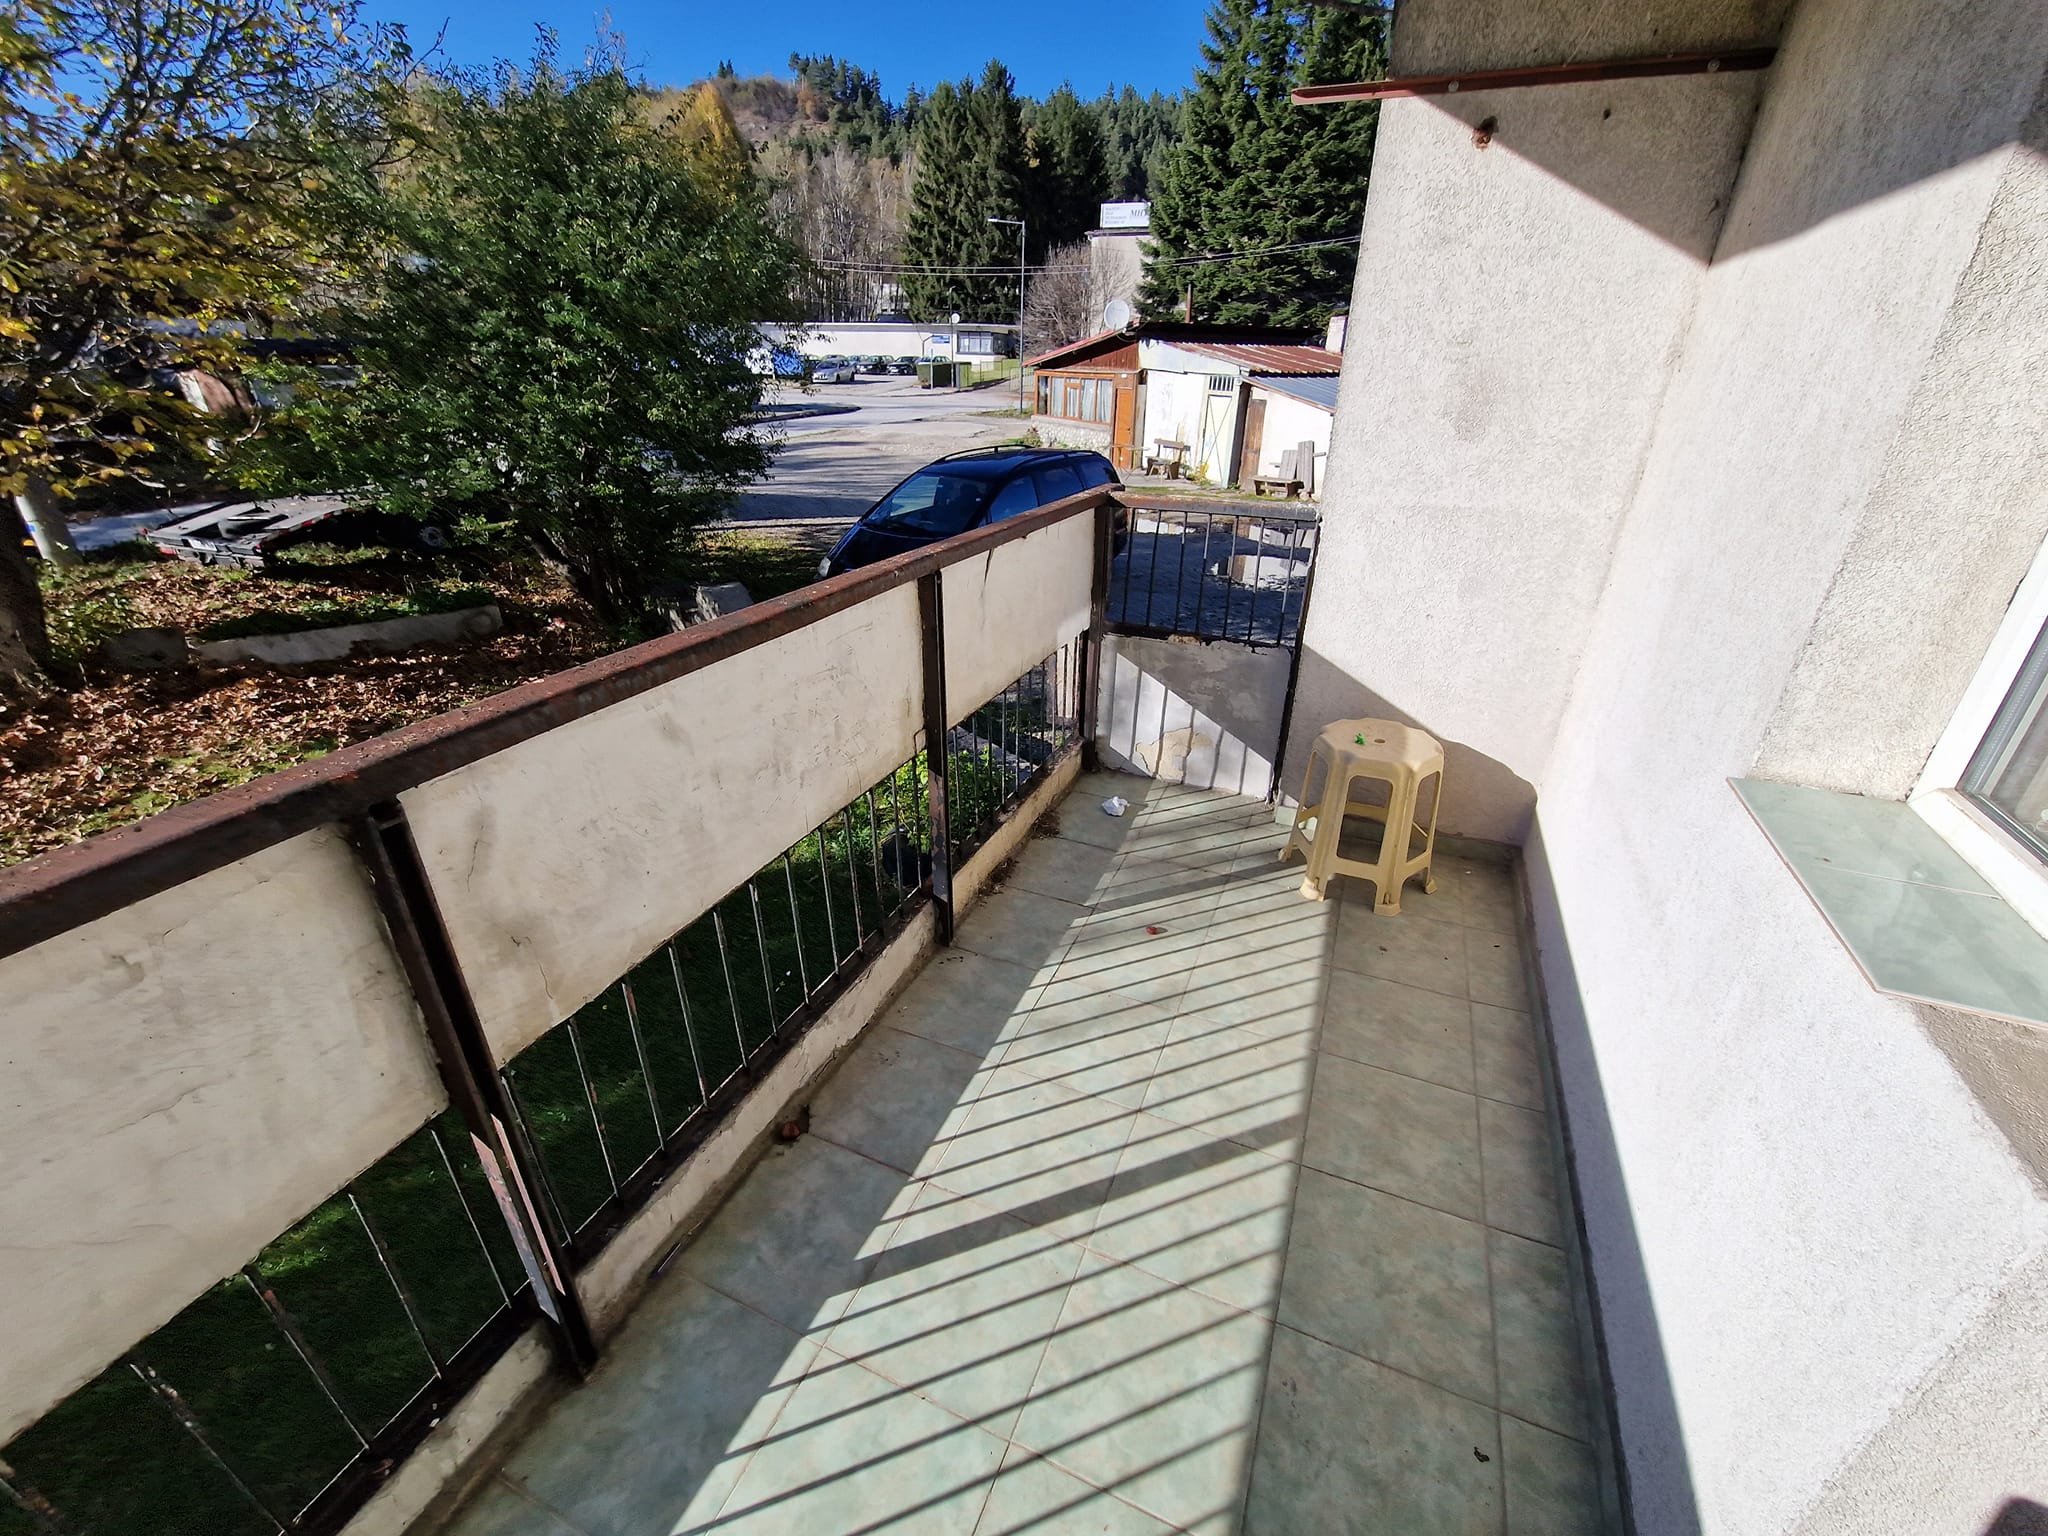 For sale in Razlog: Spacious multi-room apartment with two terraces